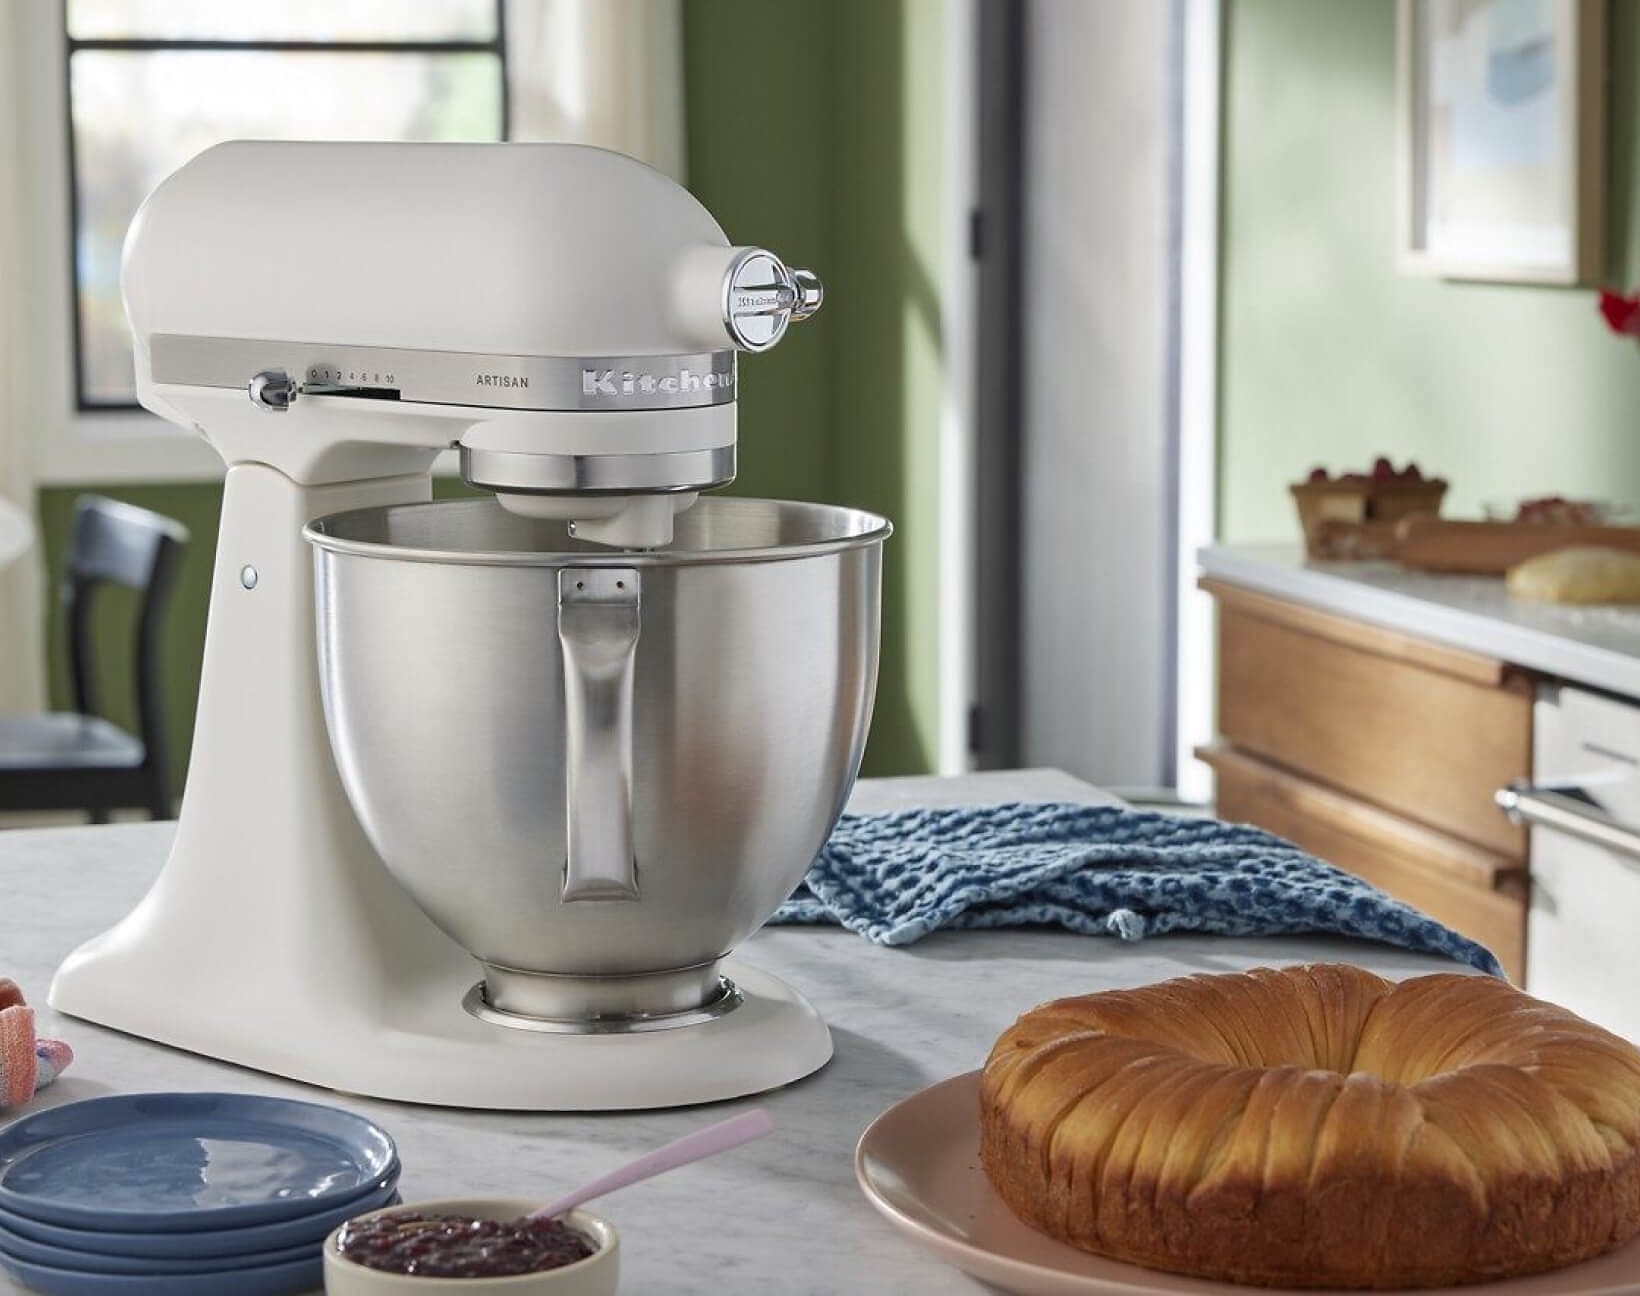 A Porcelain White Tilt-Head Stand Mixer on a countertop near a baked pastry ring.